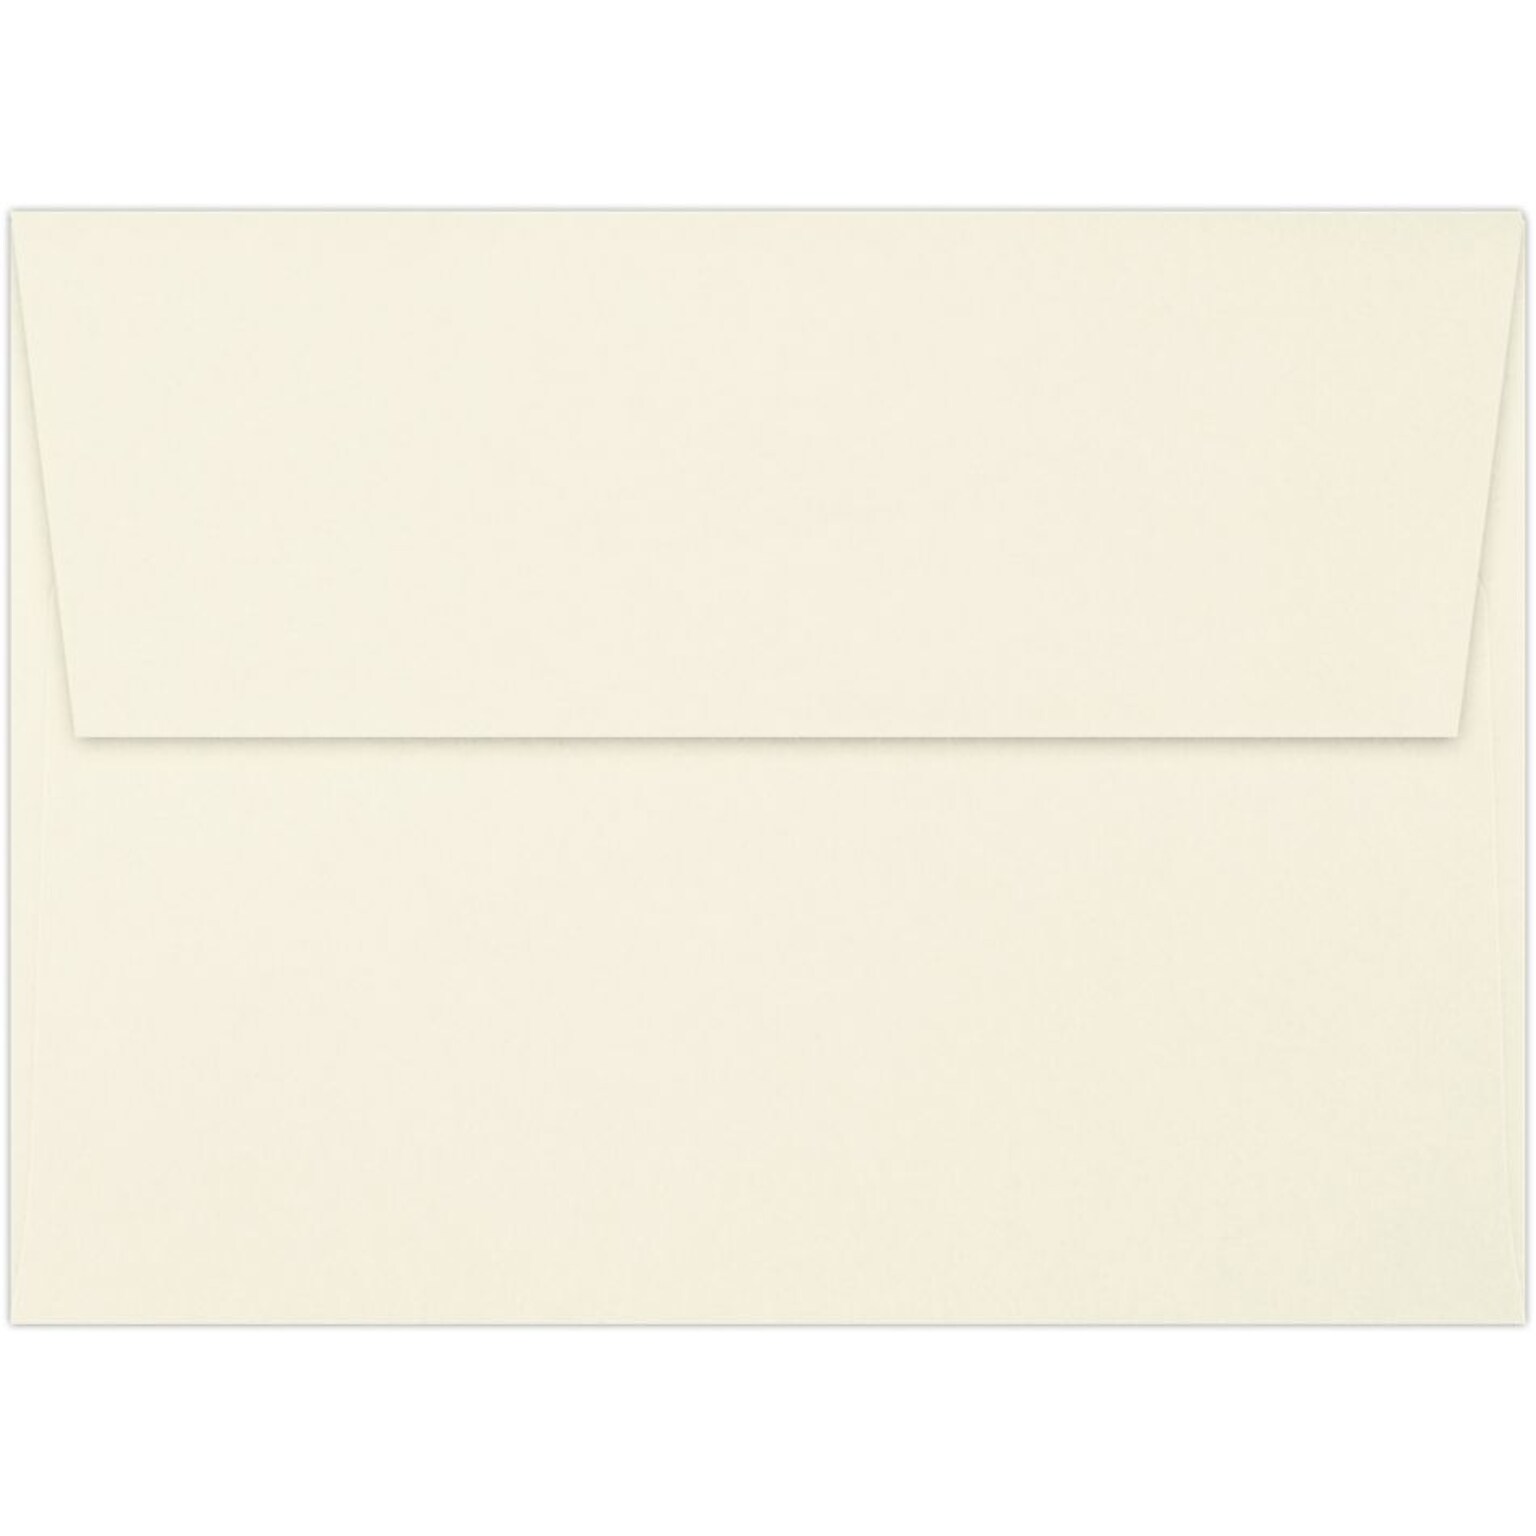 LUX A7 Invitation Envelopes (5 1/4 x 7 1/4) 500/Pack, 70lb. Classic Crest® Natural White (4880-70NW-500)